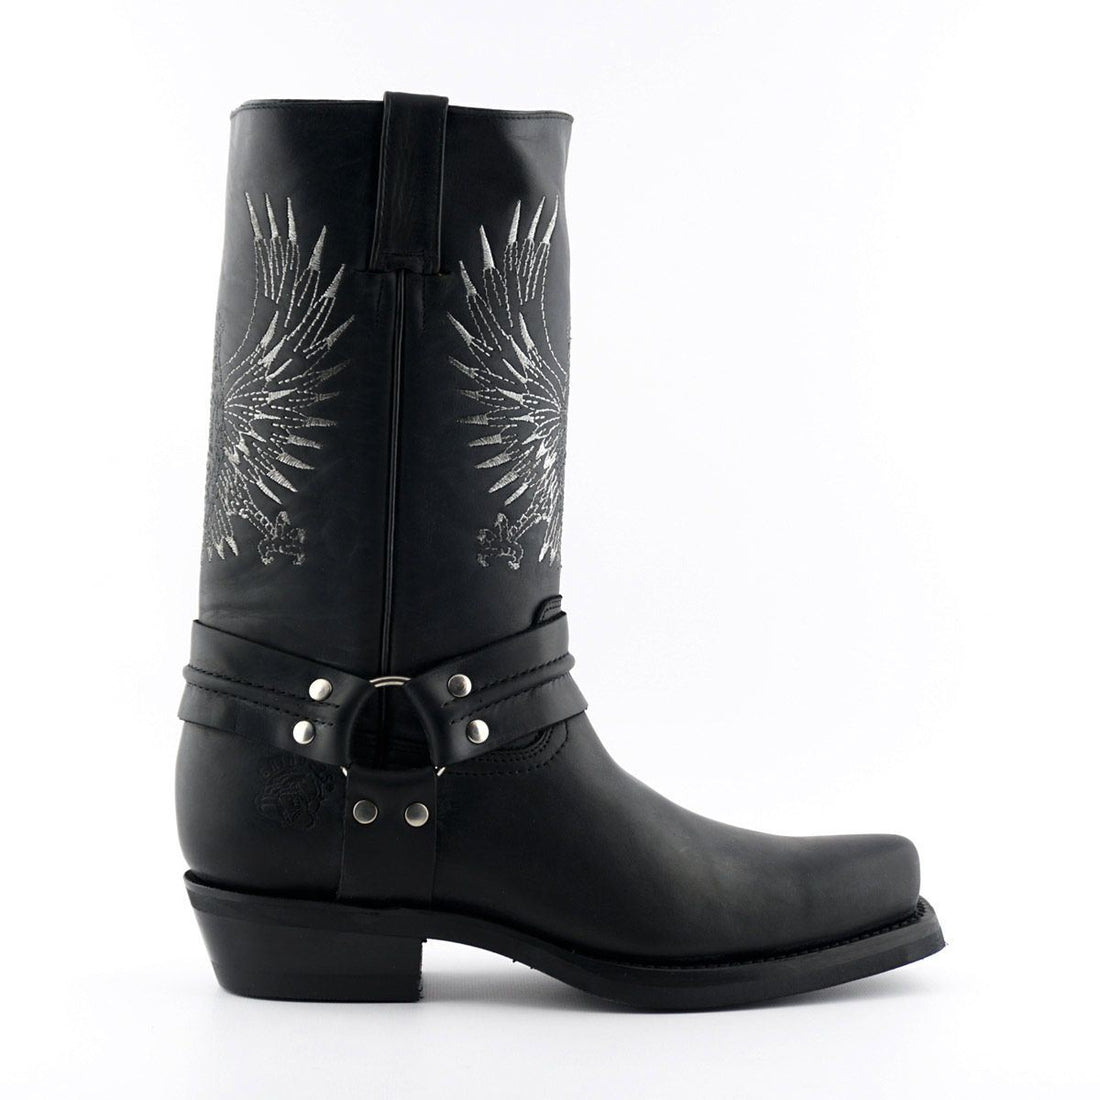 Grinders Mens Black Leather Cowboy Boots-Bald Eagle - Upperclass Fashions 